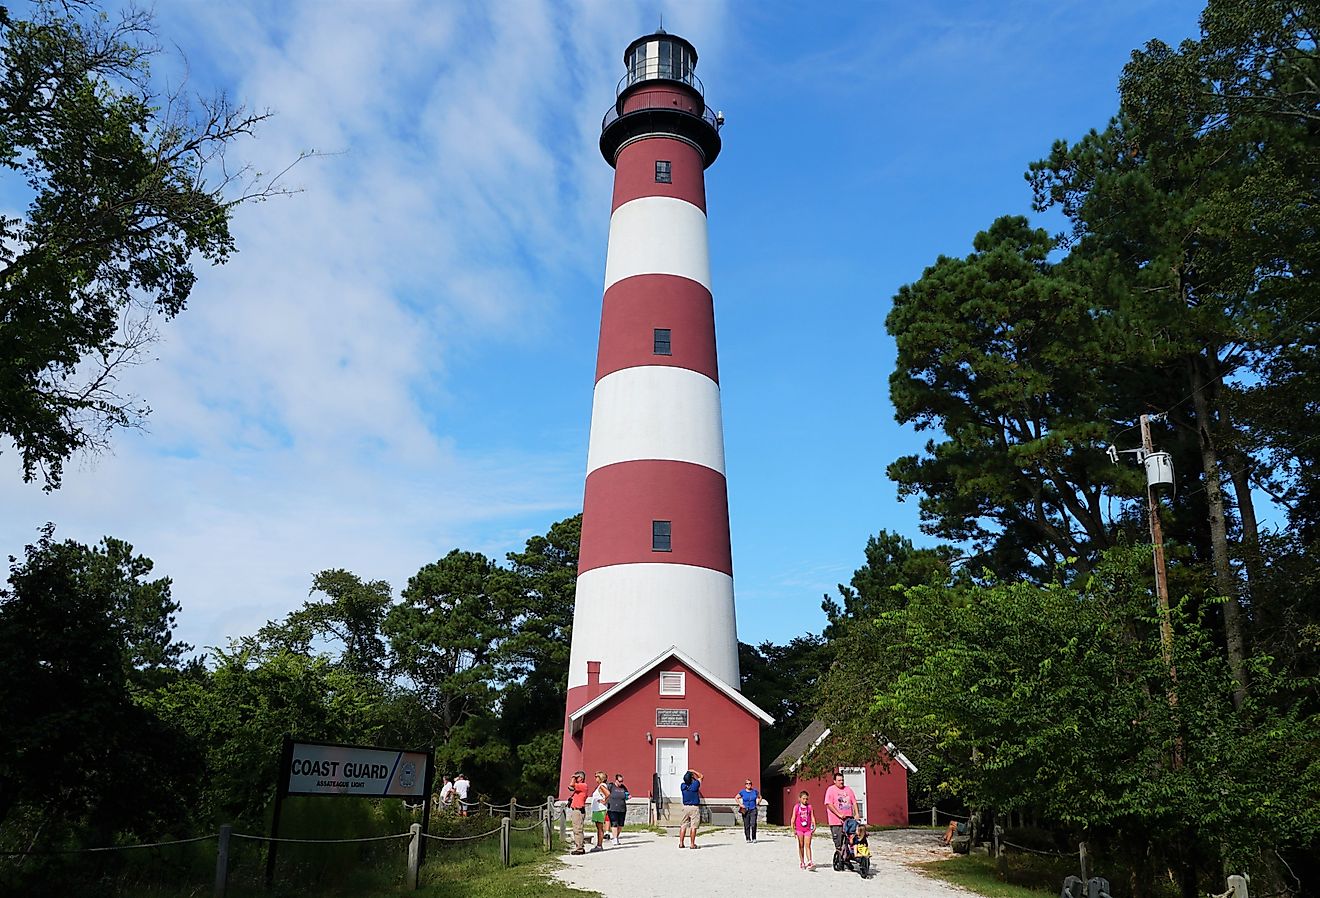 The red and white tower of Assateague Light House, Chincoteague, Virginia. Image credit Khairil Azhar Junos via Shutterstock